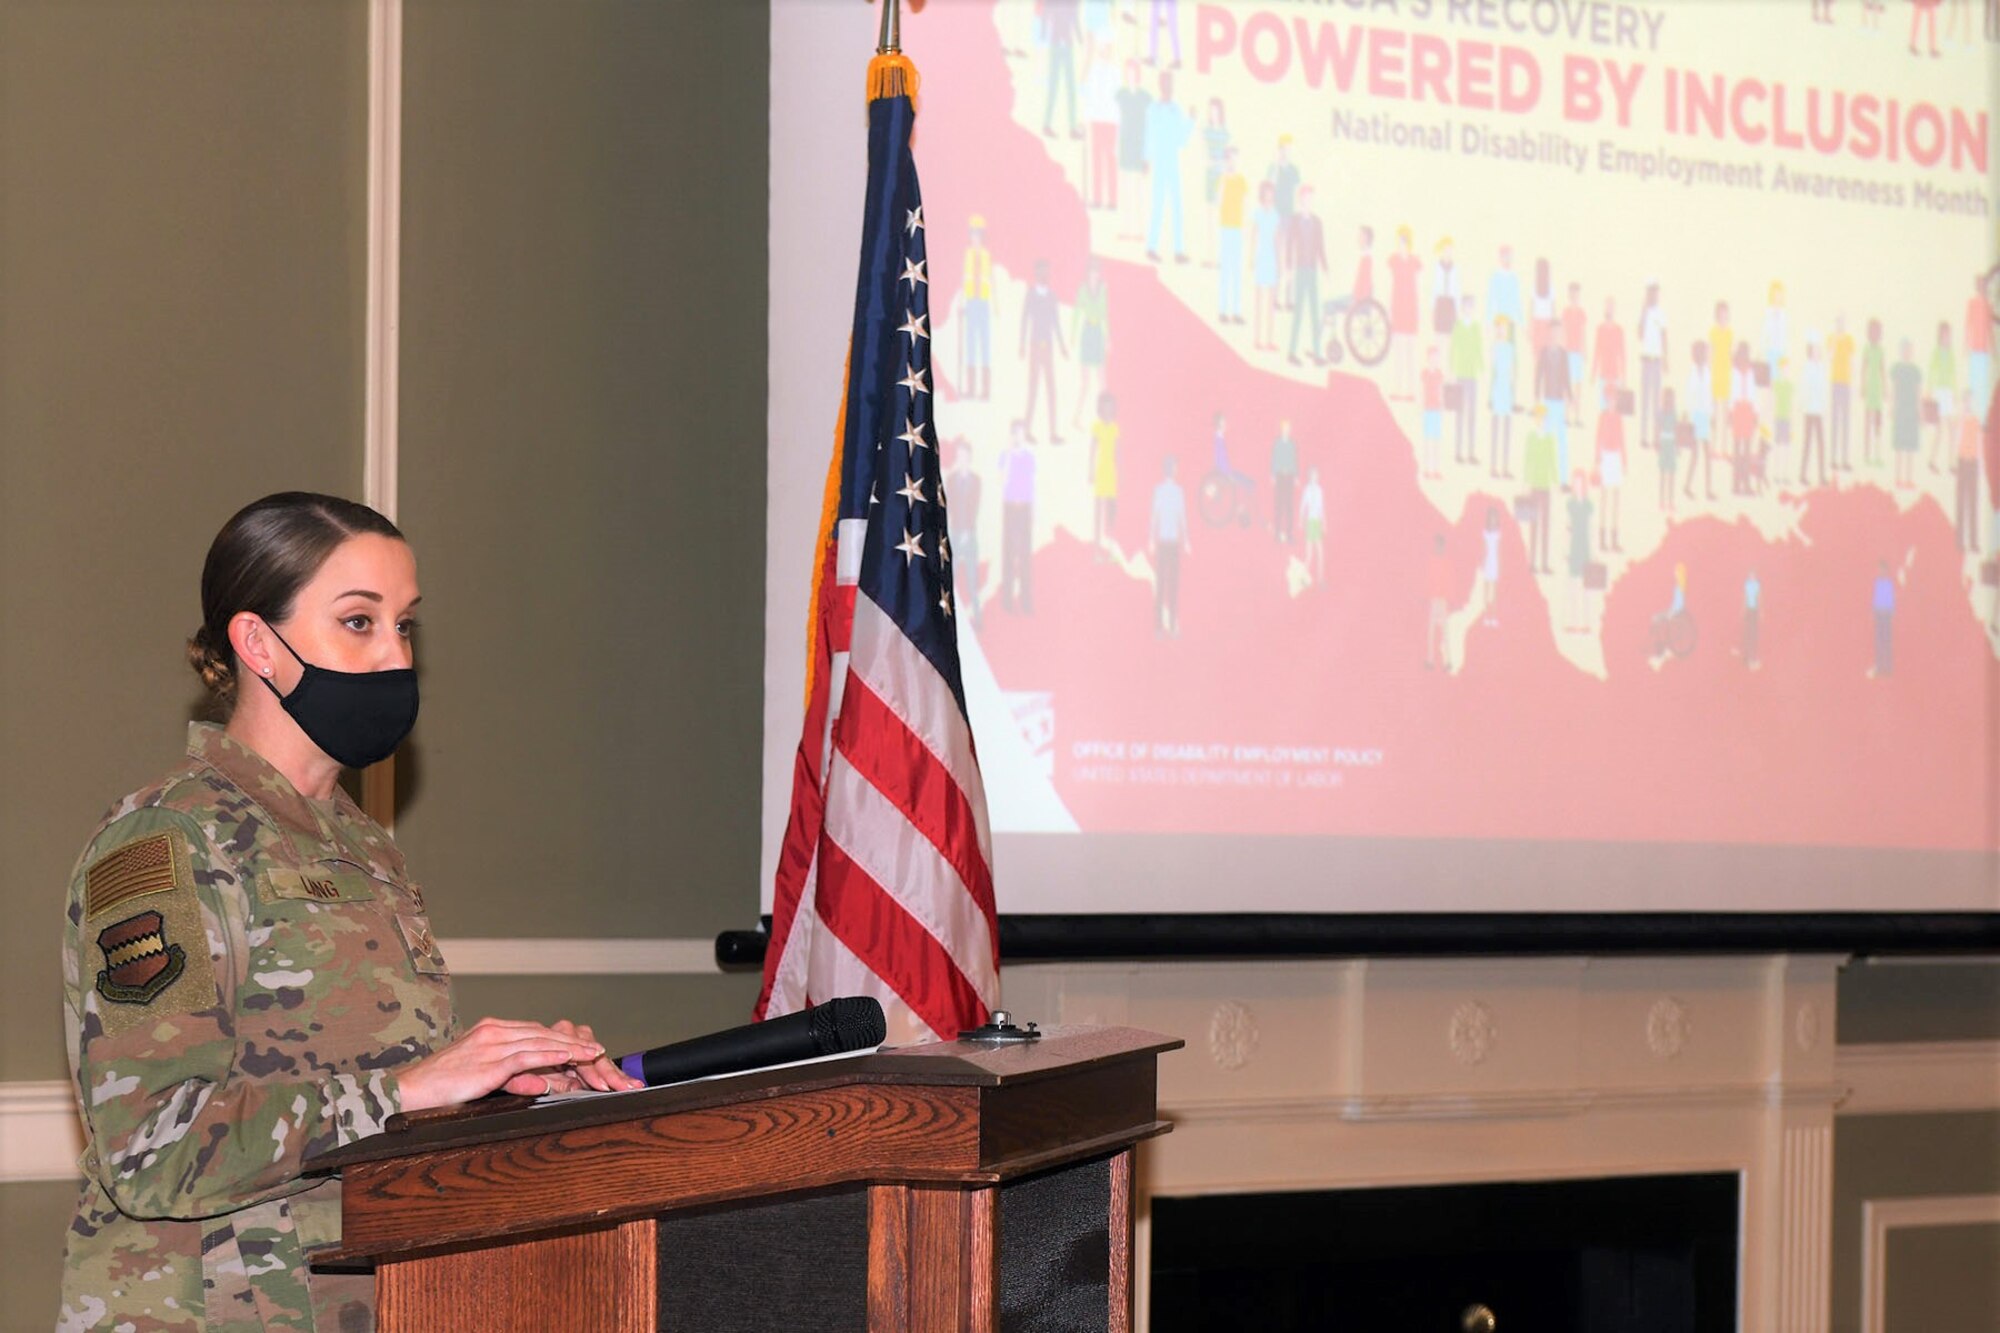 Female Air Force member in camouflauge uniform speaks at a podium.